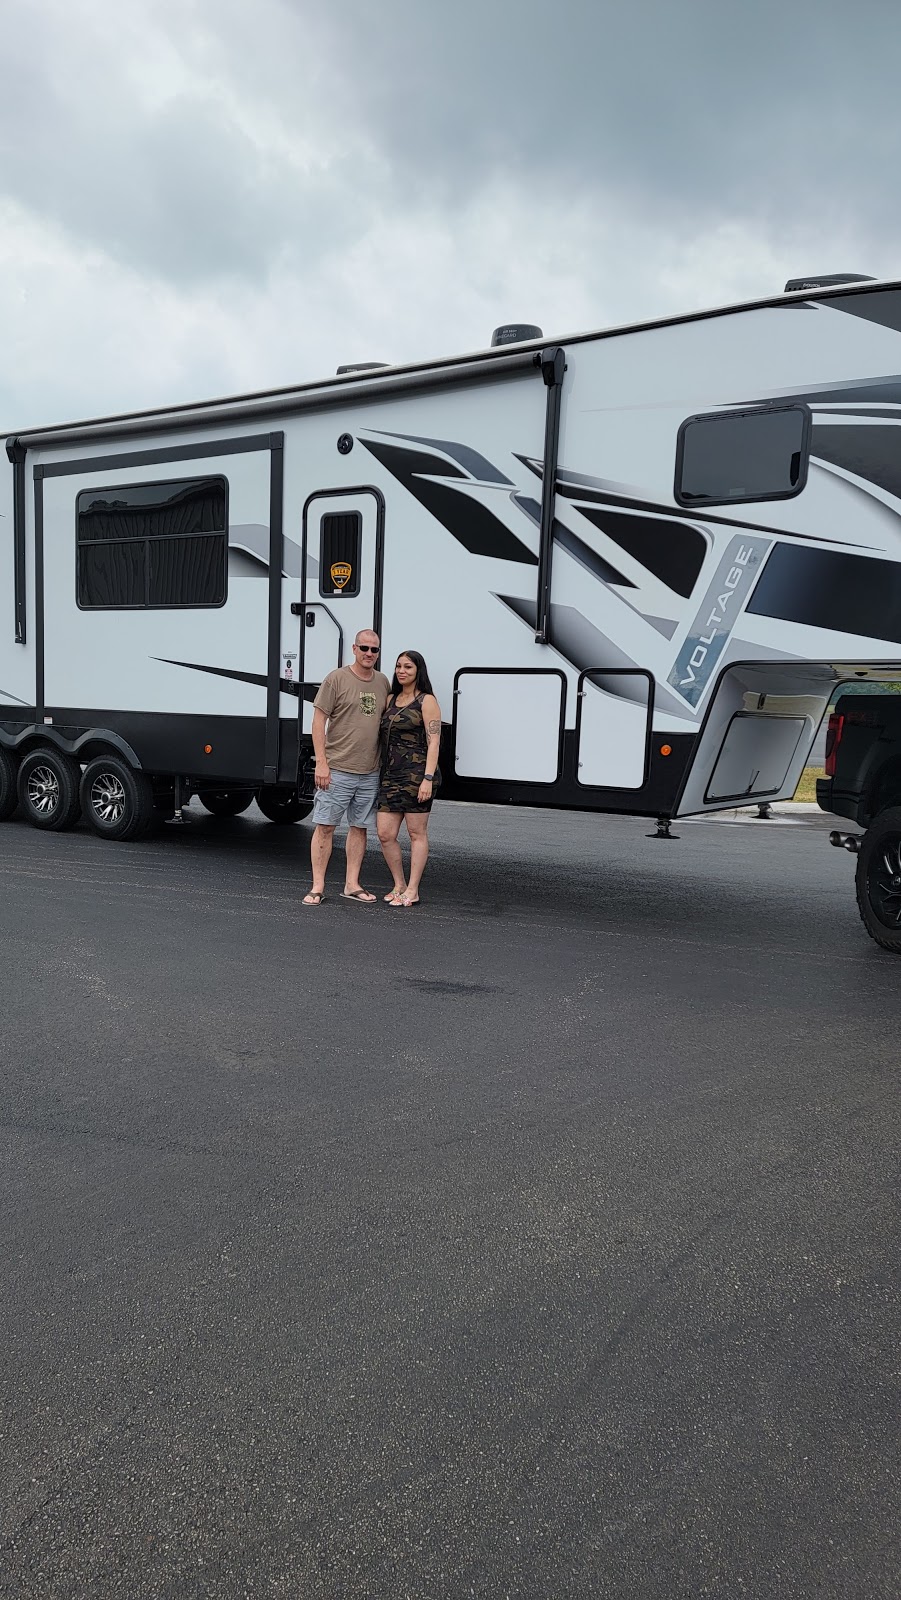 Couchs RV Nation | 5555 Kennel Rd, Trenton, OH 45067, USA | Phone: (513) 863-7000